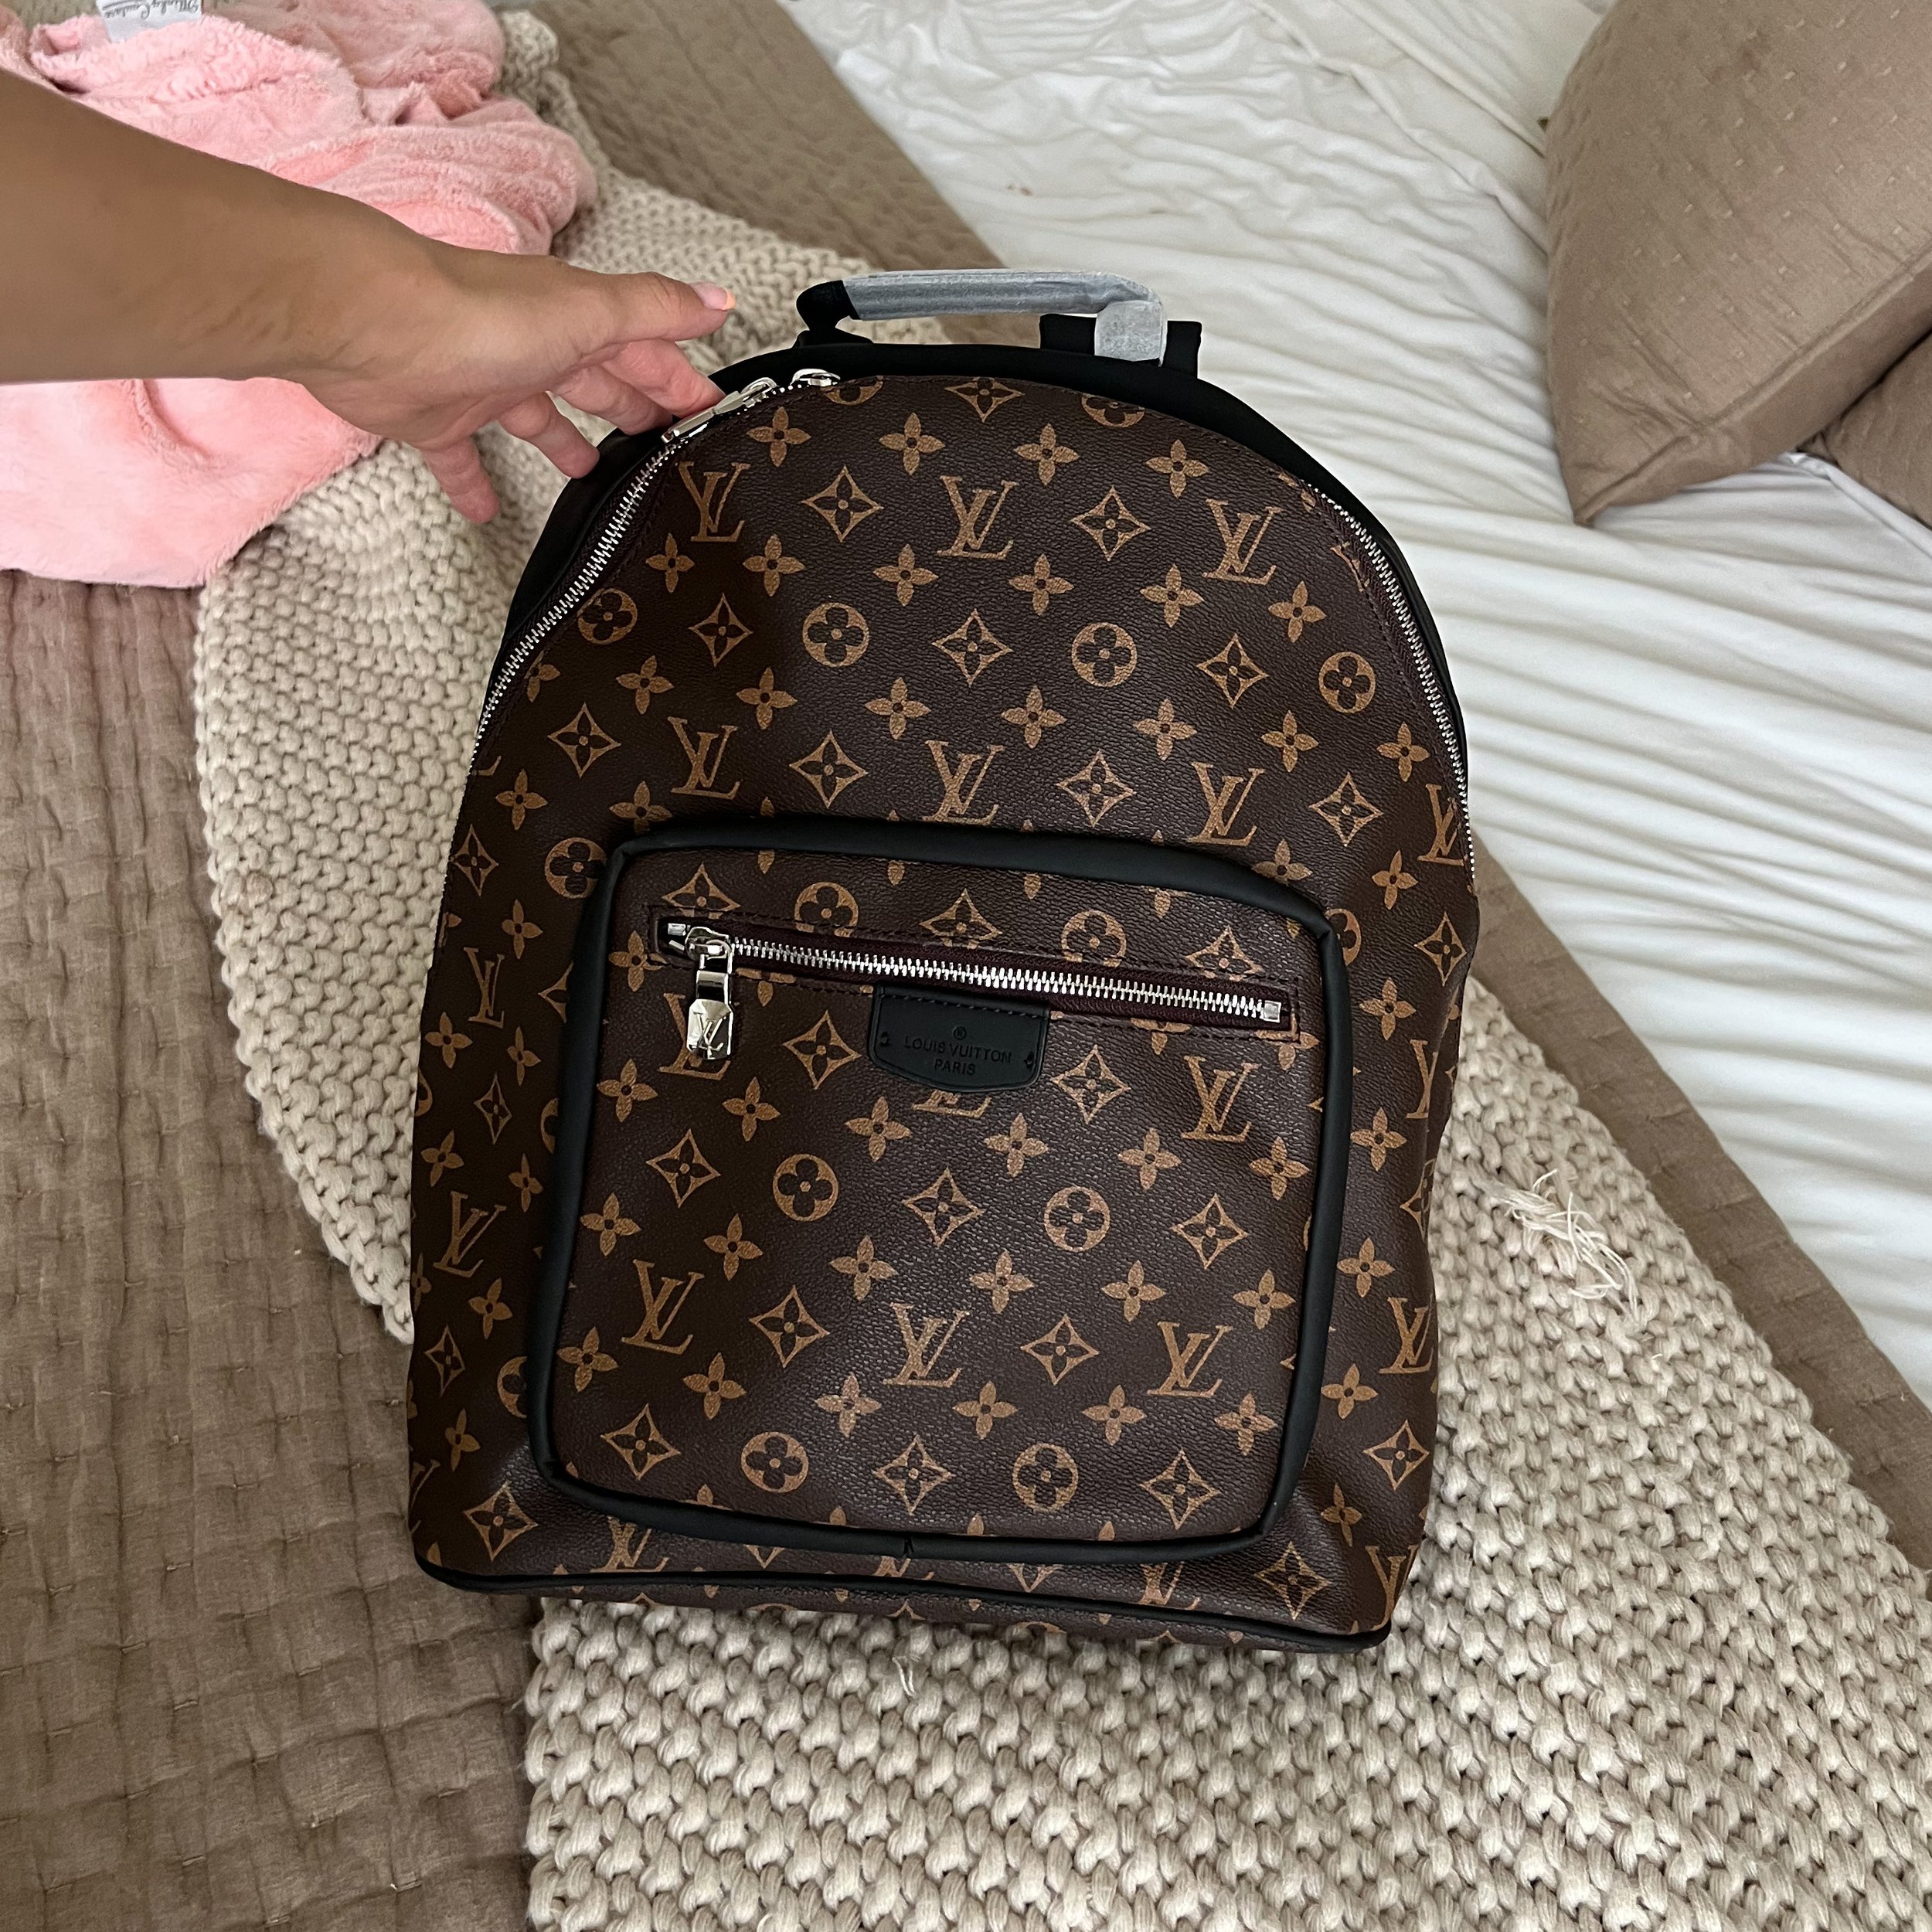 Chain wallets are my favorite! LV felicie review! : r/DHgate